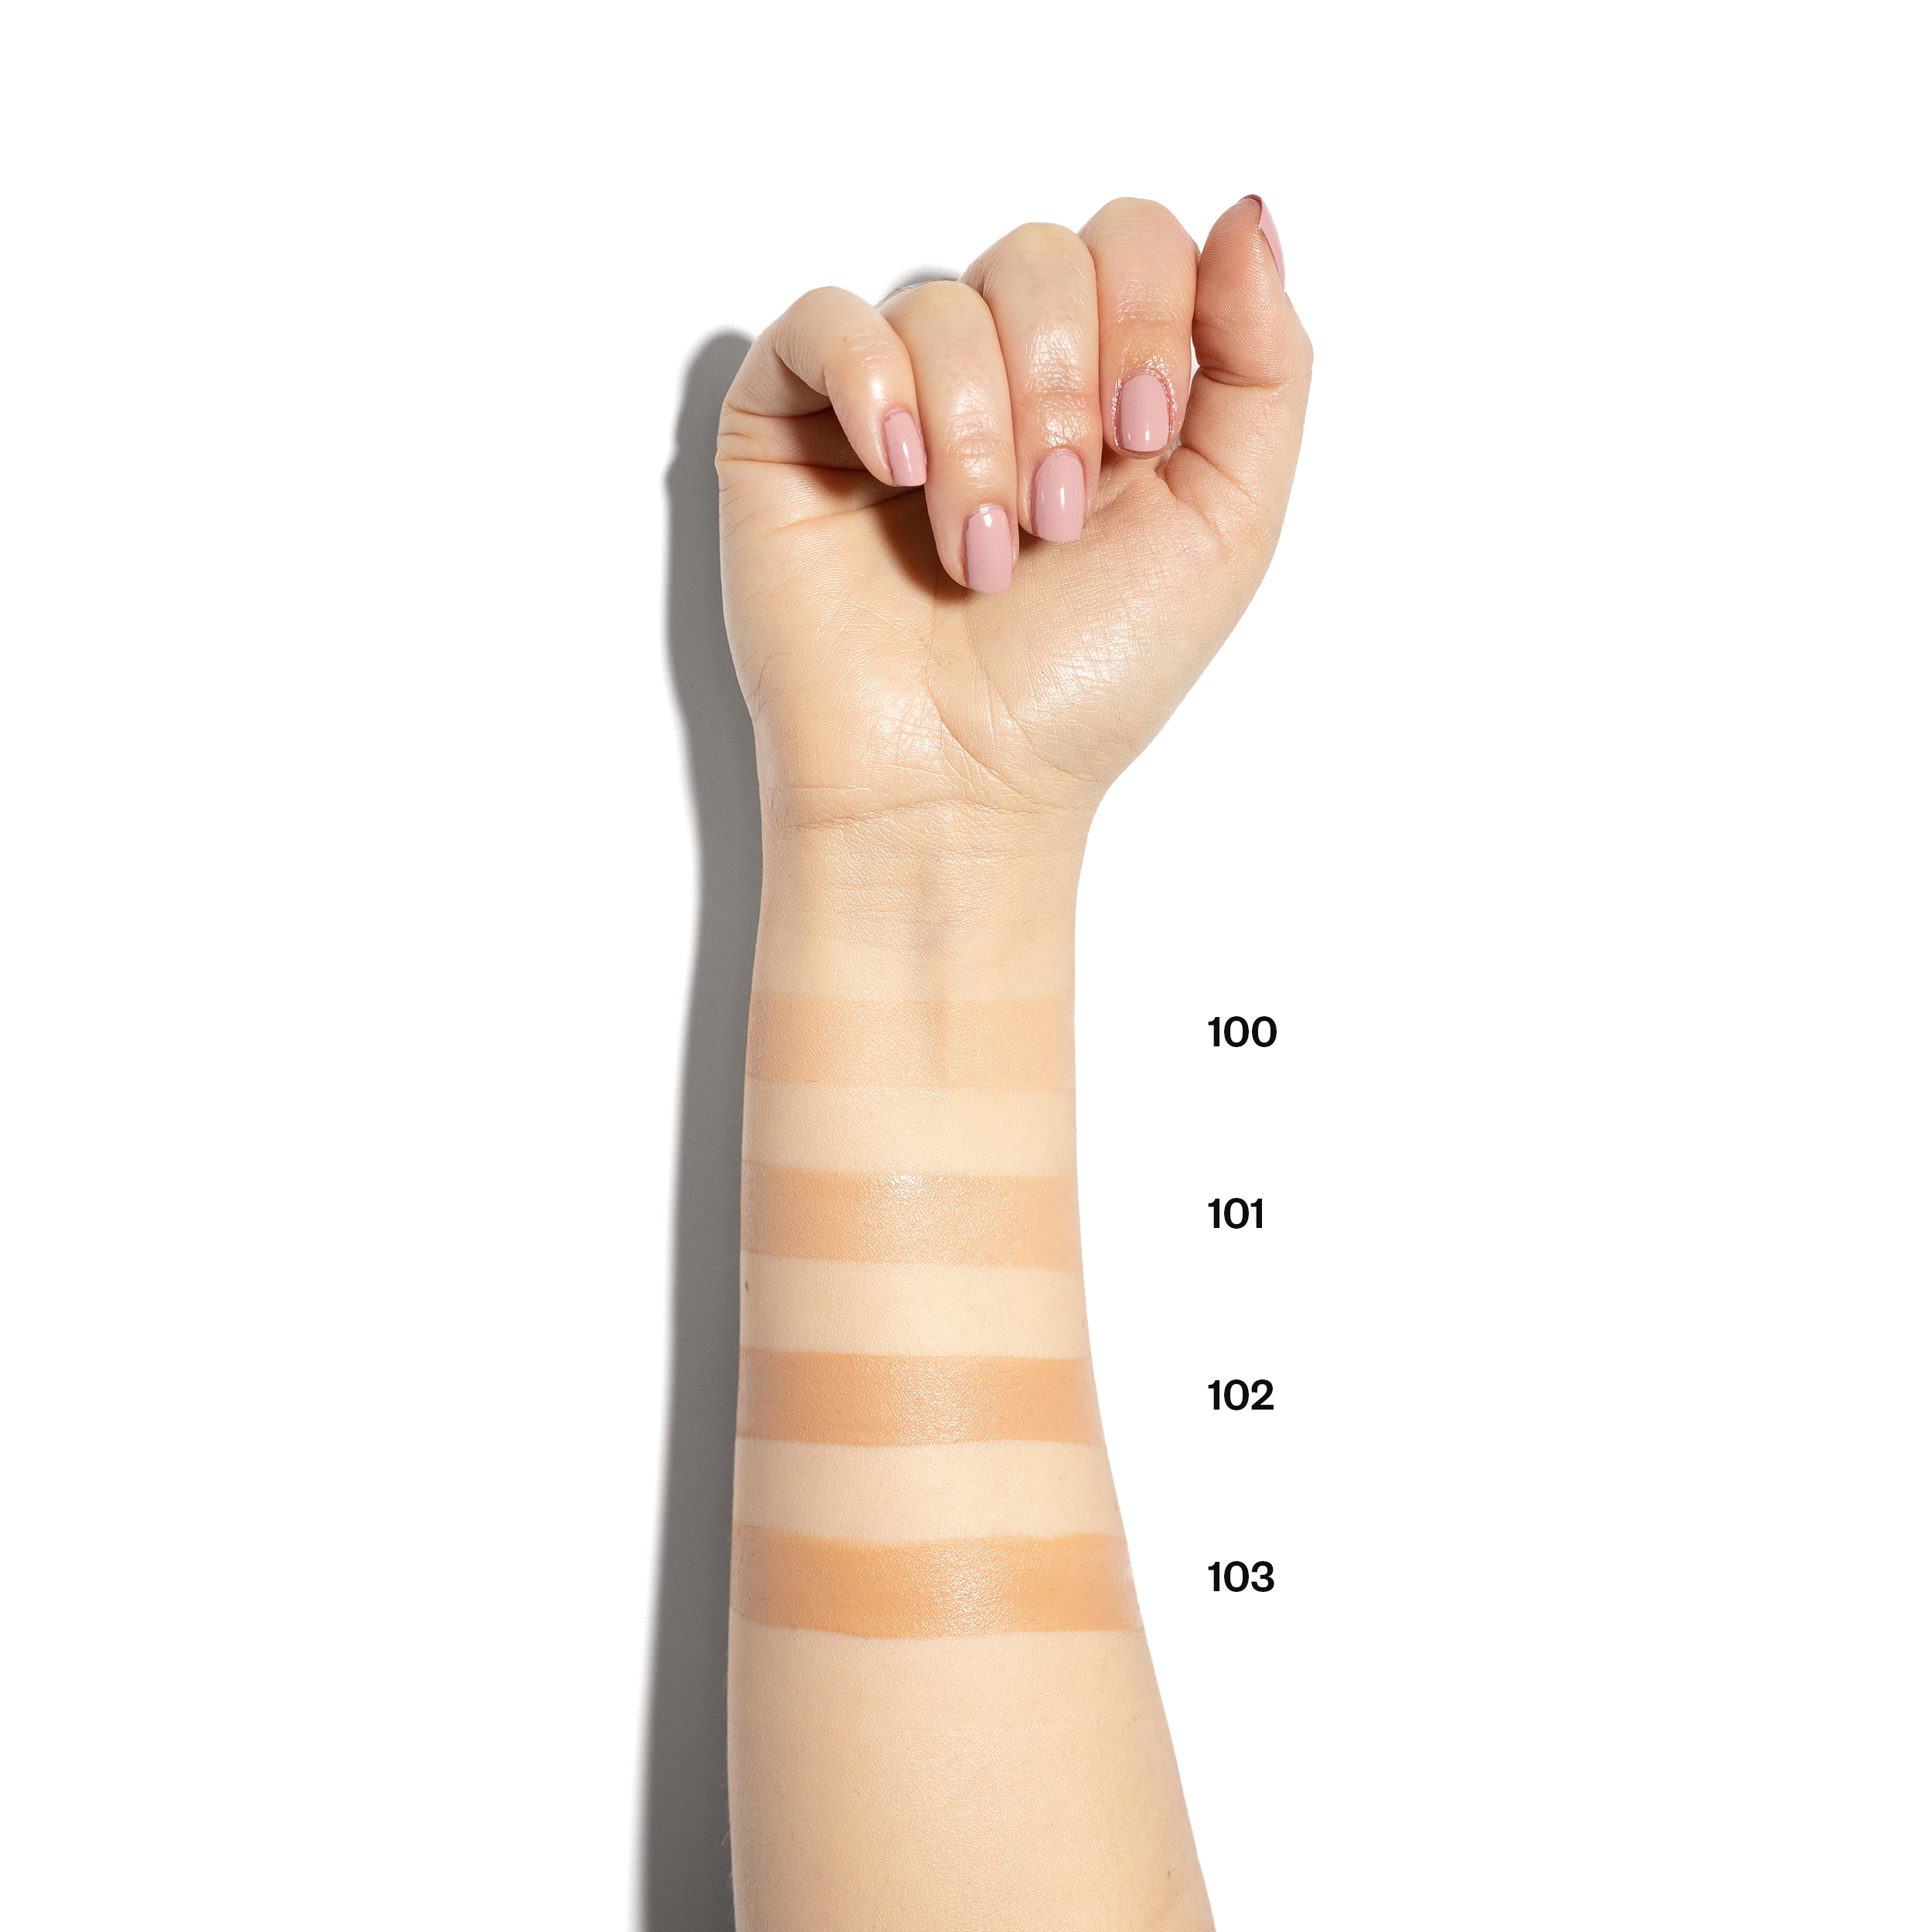 Swatches on the Skin With Numbers